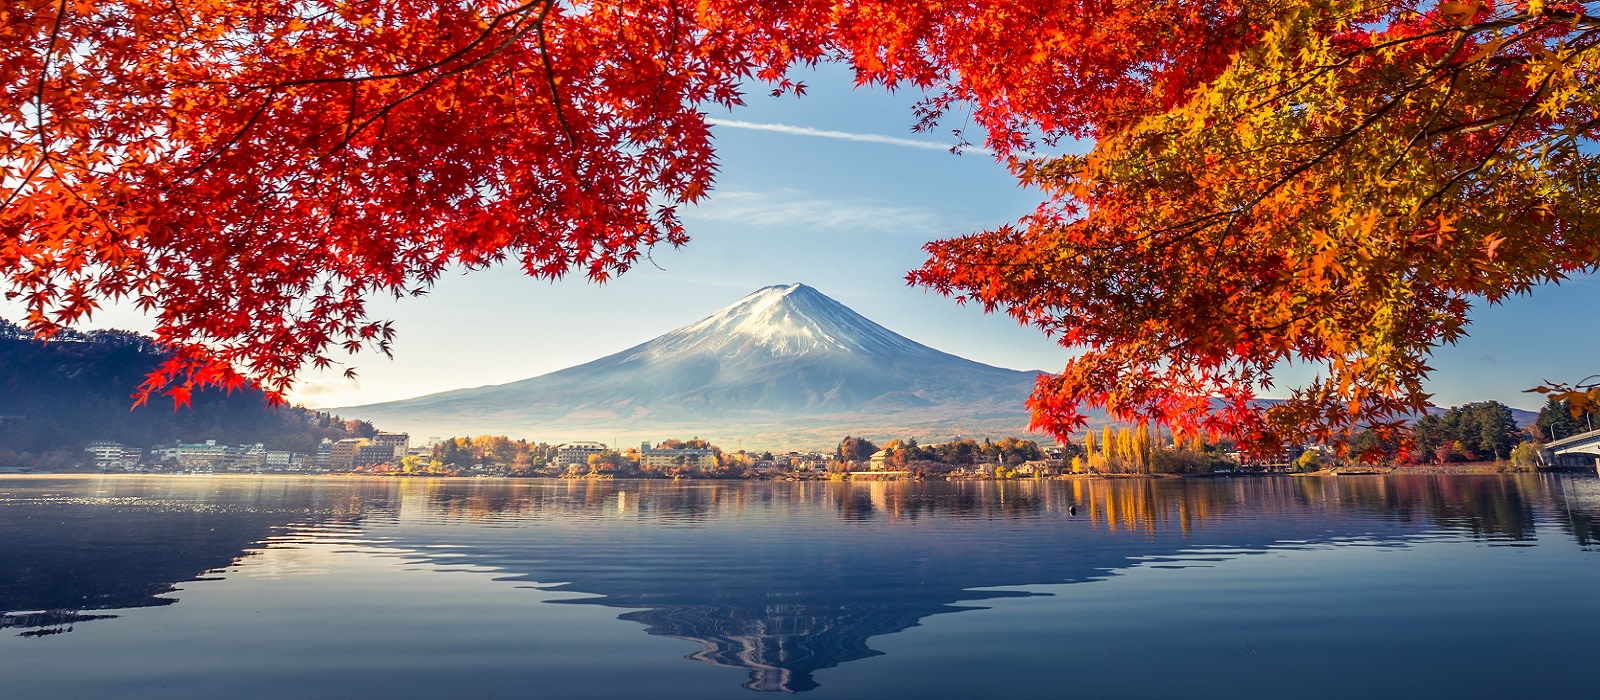 Japan For Beginners Tokyo Kyoto And Mount Fuji Tours And Trips With